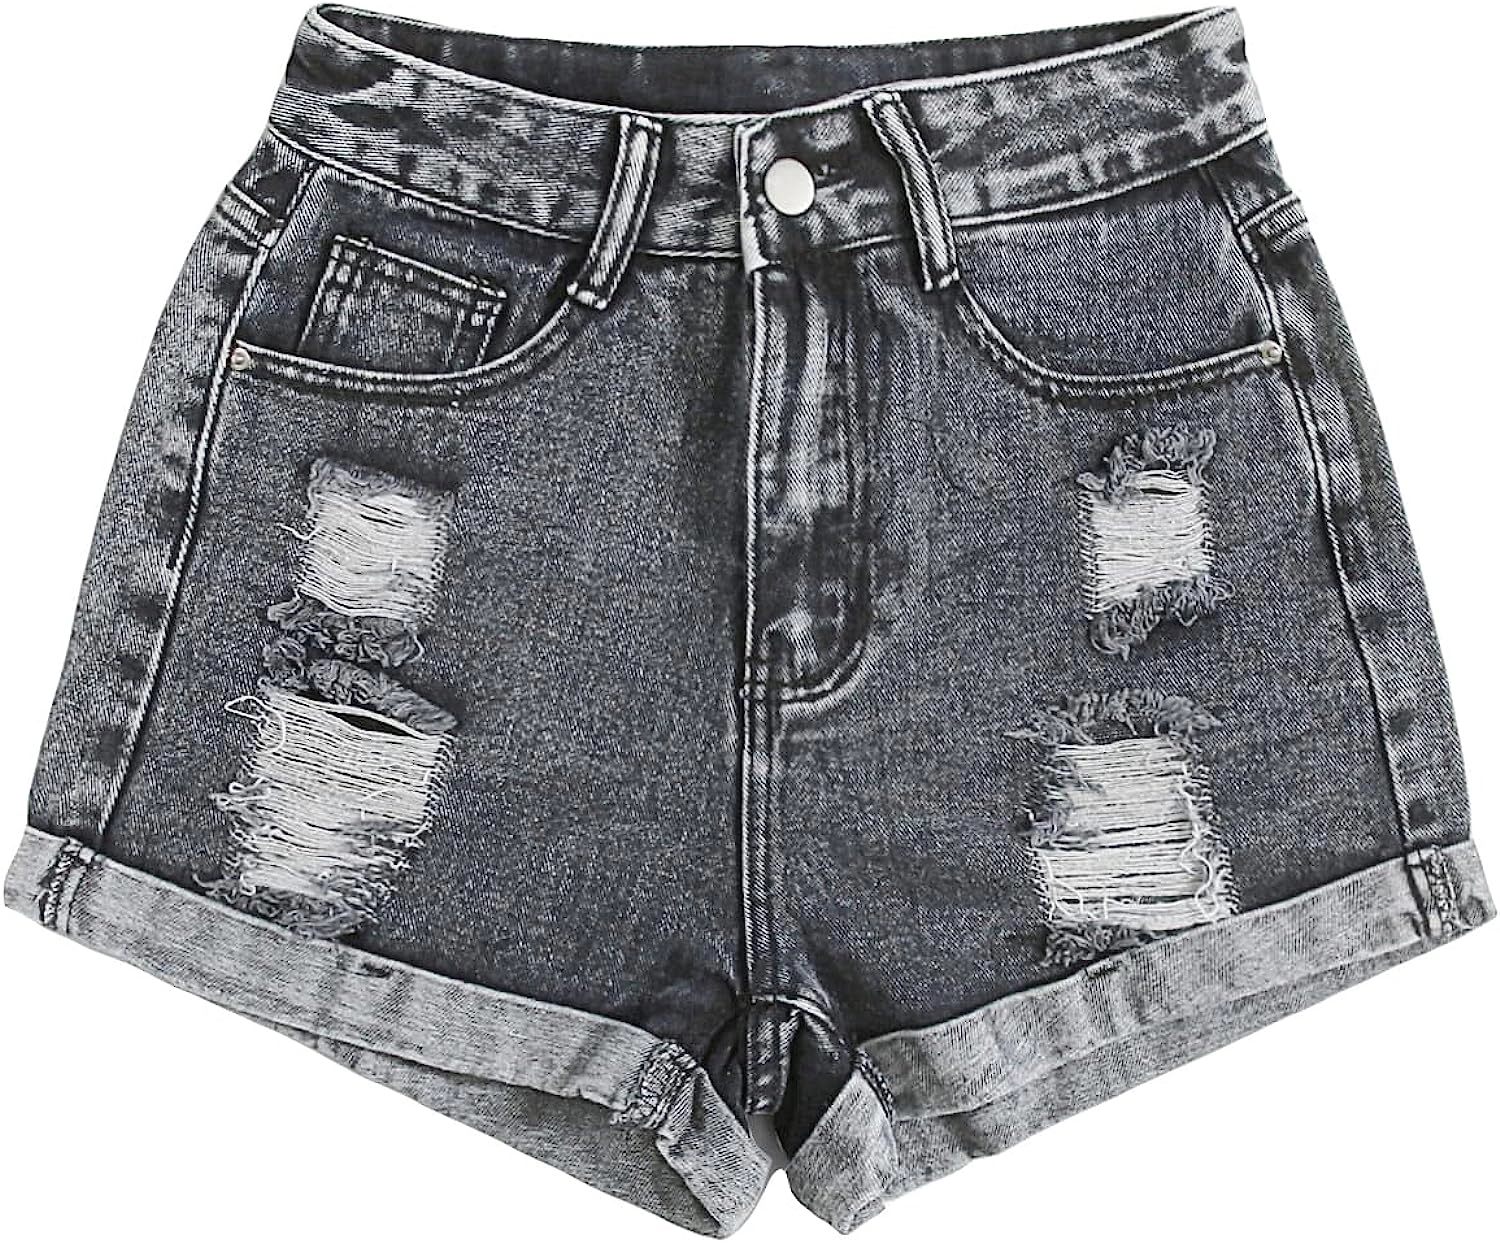 Womens Striaght Denim Jean Shorts From Banglash Pants Factory